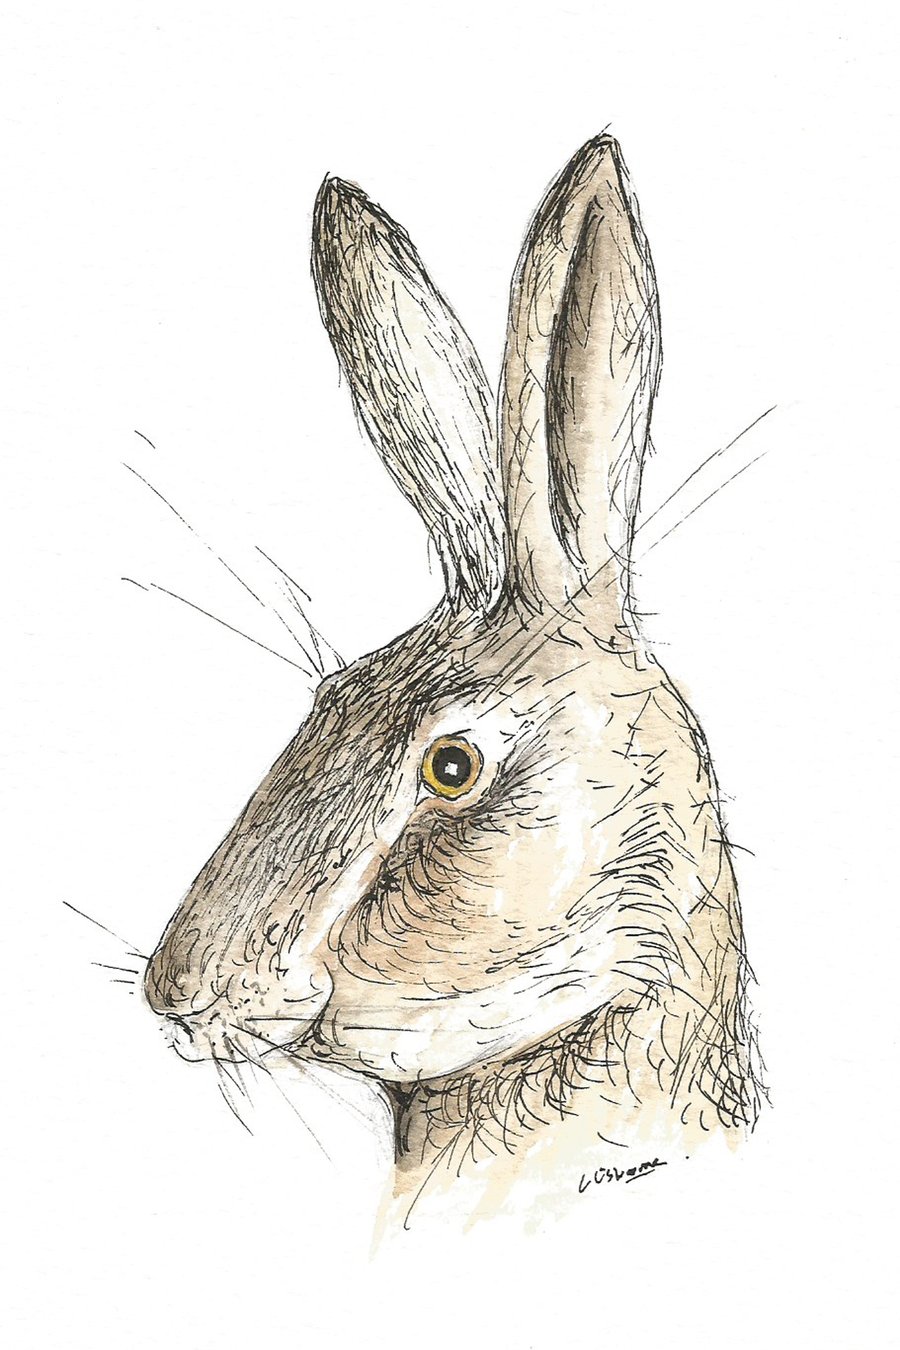 Surprised Hare - signed print from original animal painting